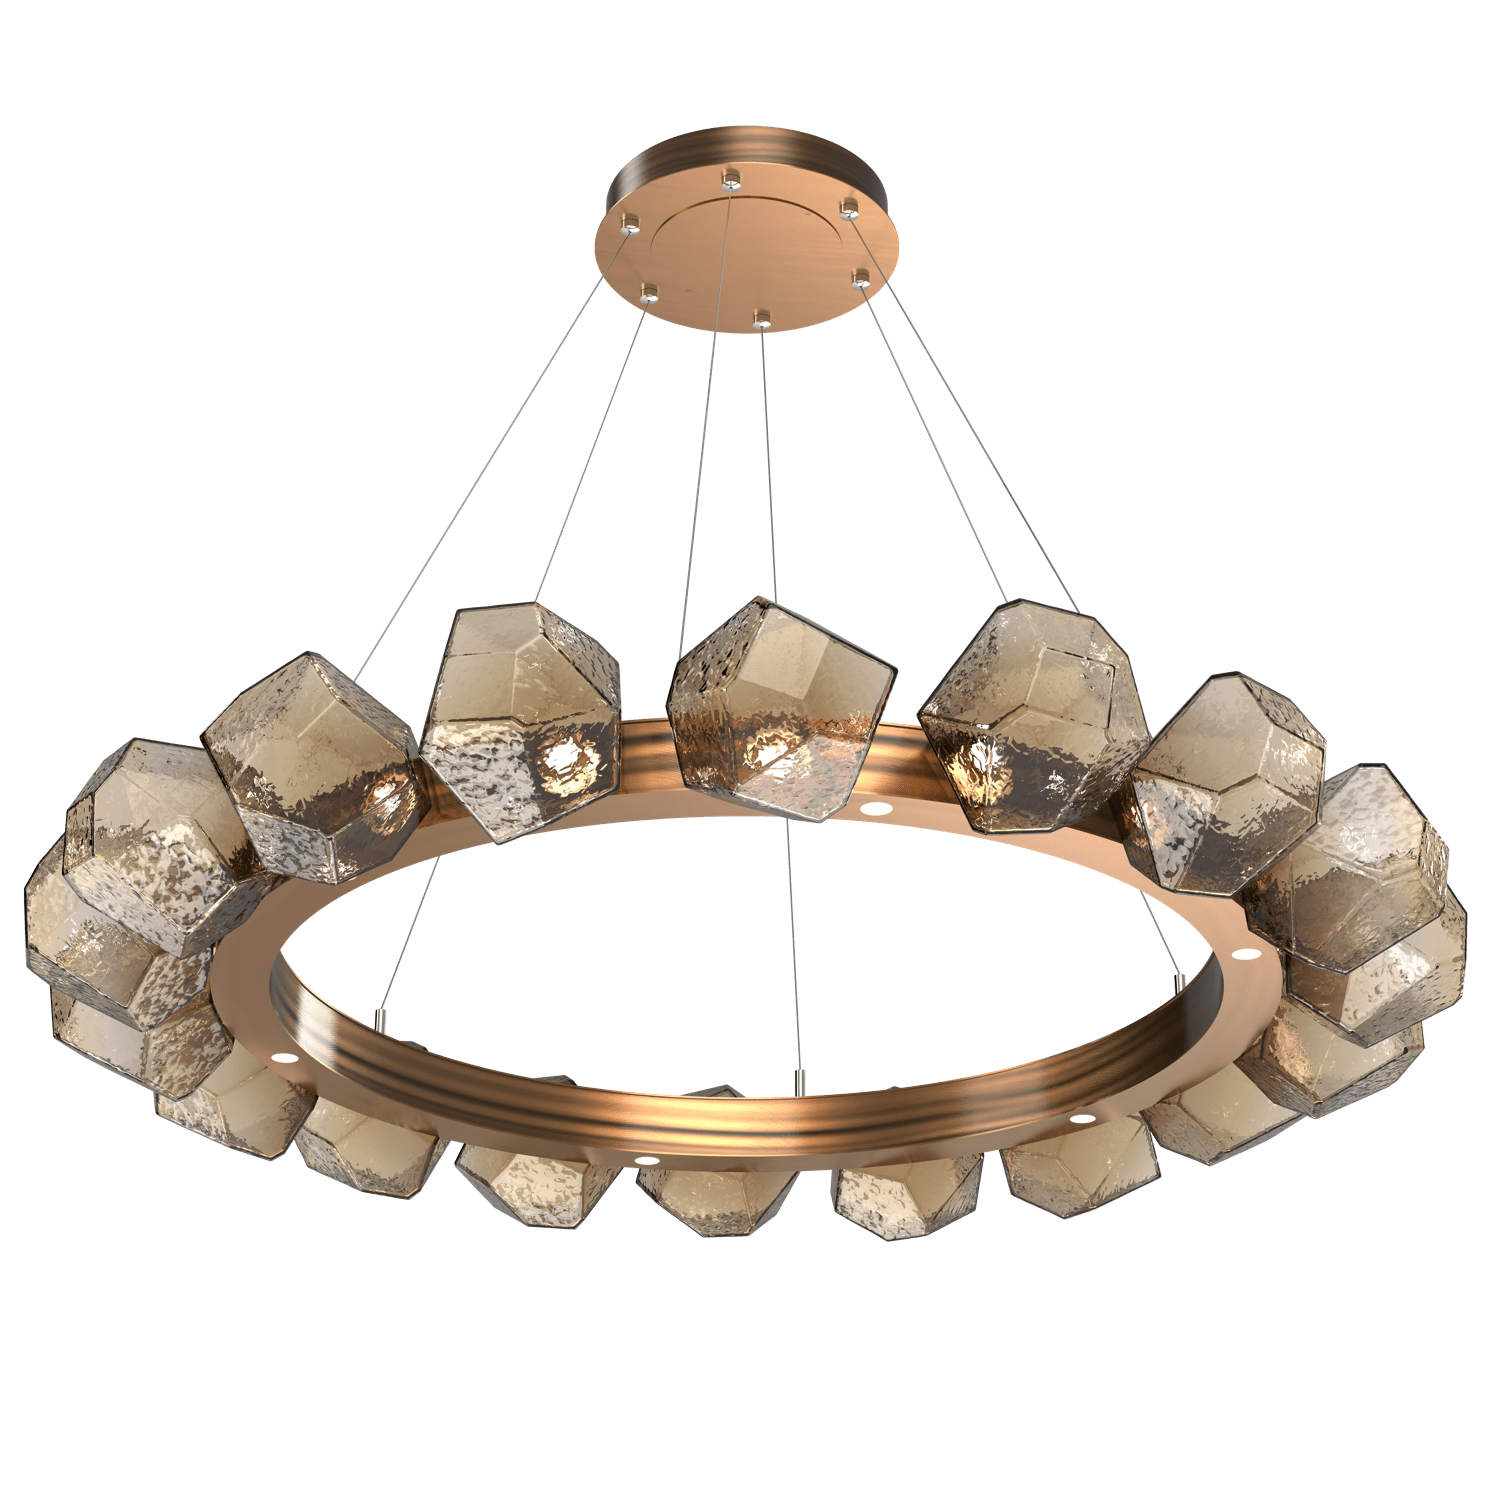 CHB0039-48-RB-B-Hammerton-Studio-Gem-48-inch-radial-ring-chandelier-with-oil-rubbed-bronze-finish-and-bronze-blown-glass-shades-and-LED-lamping